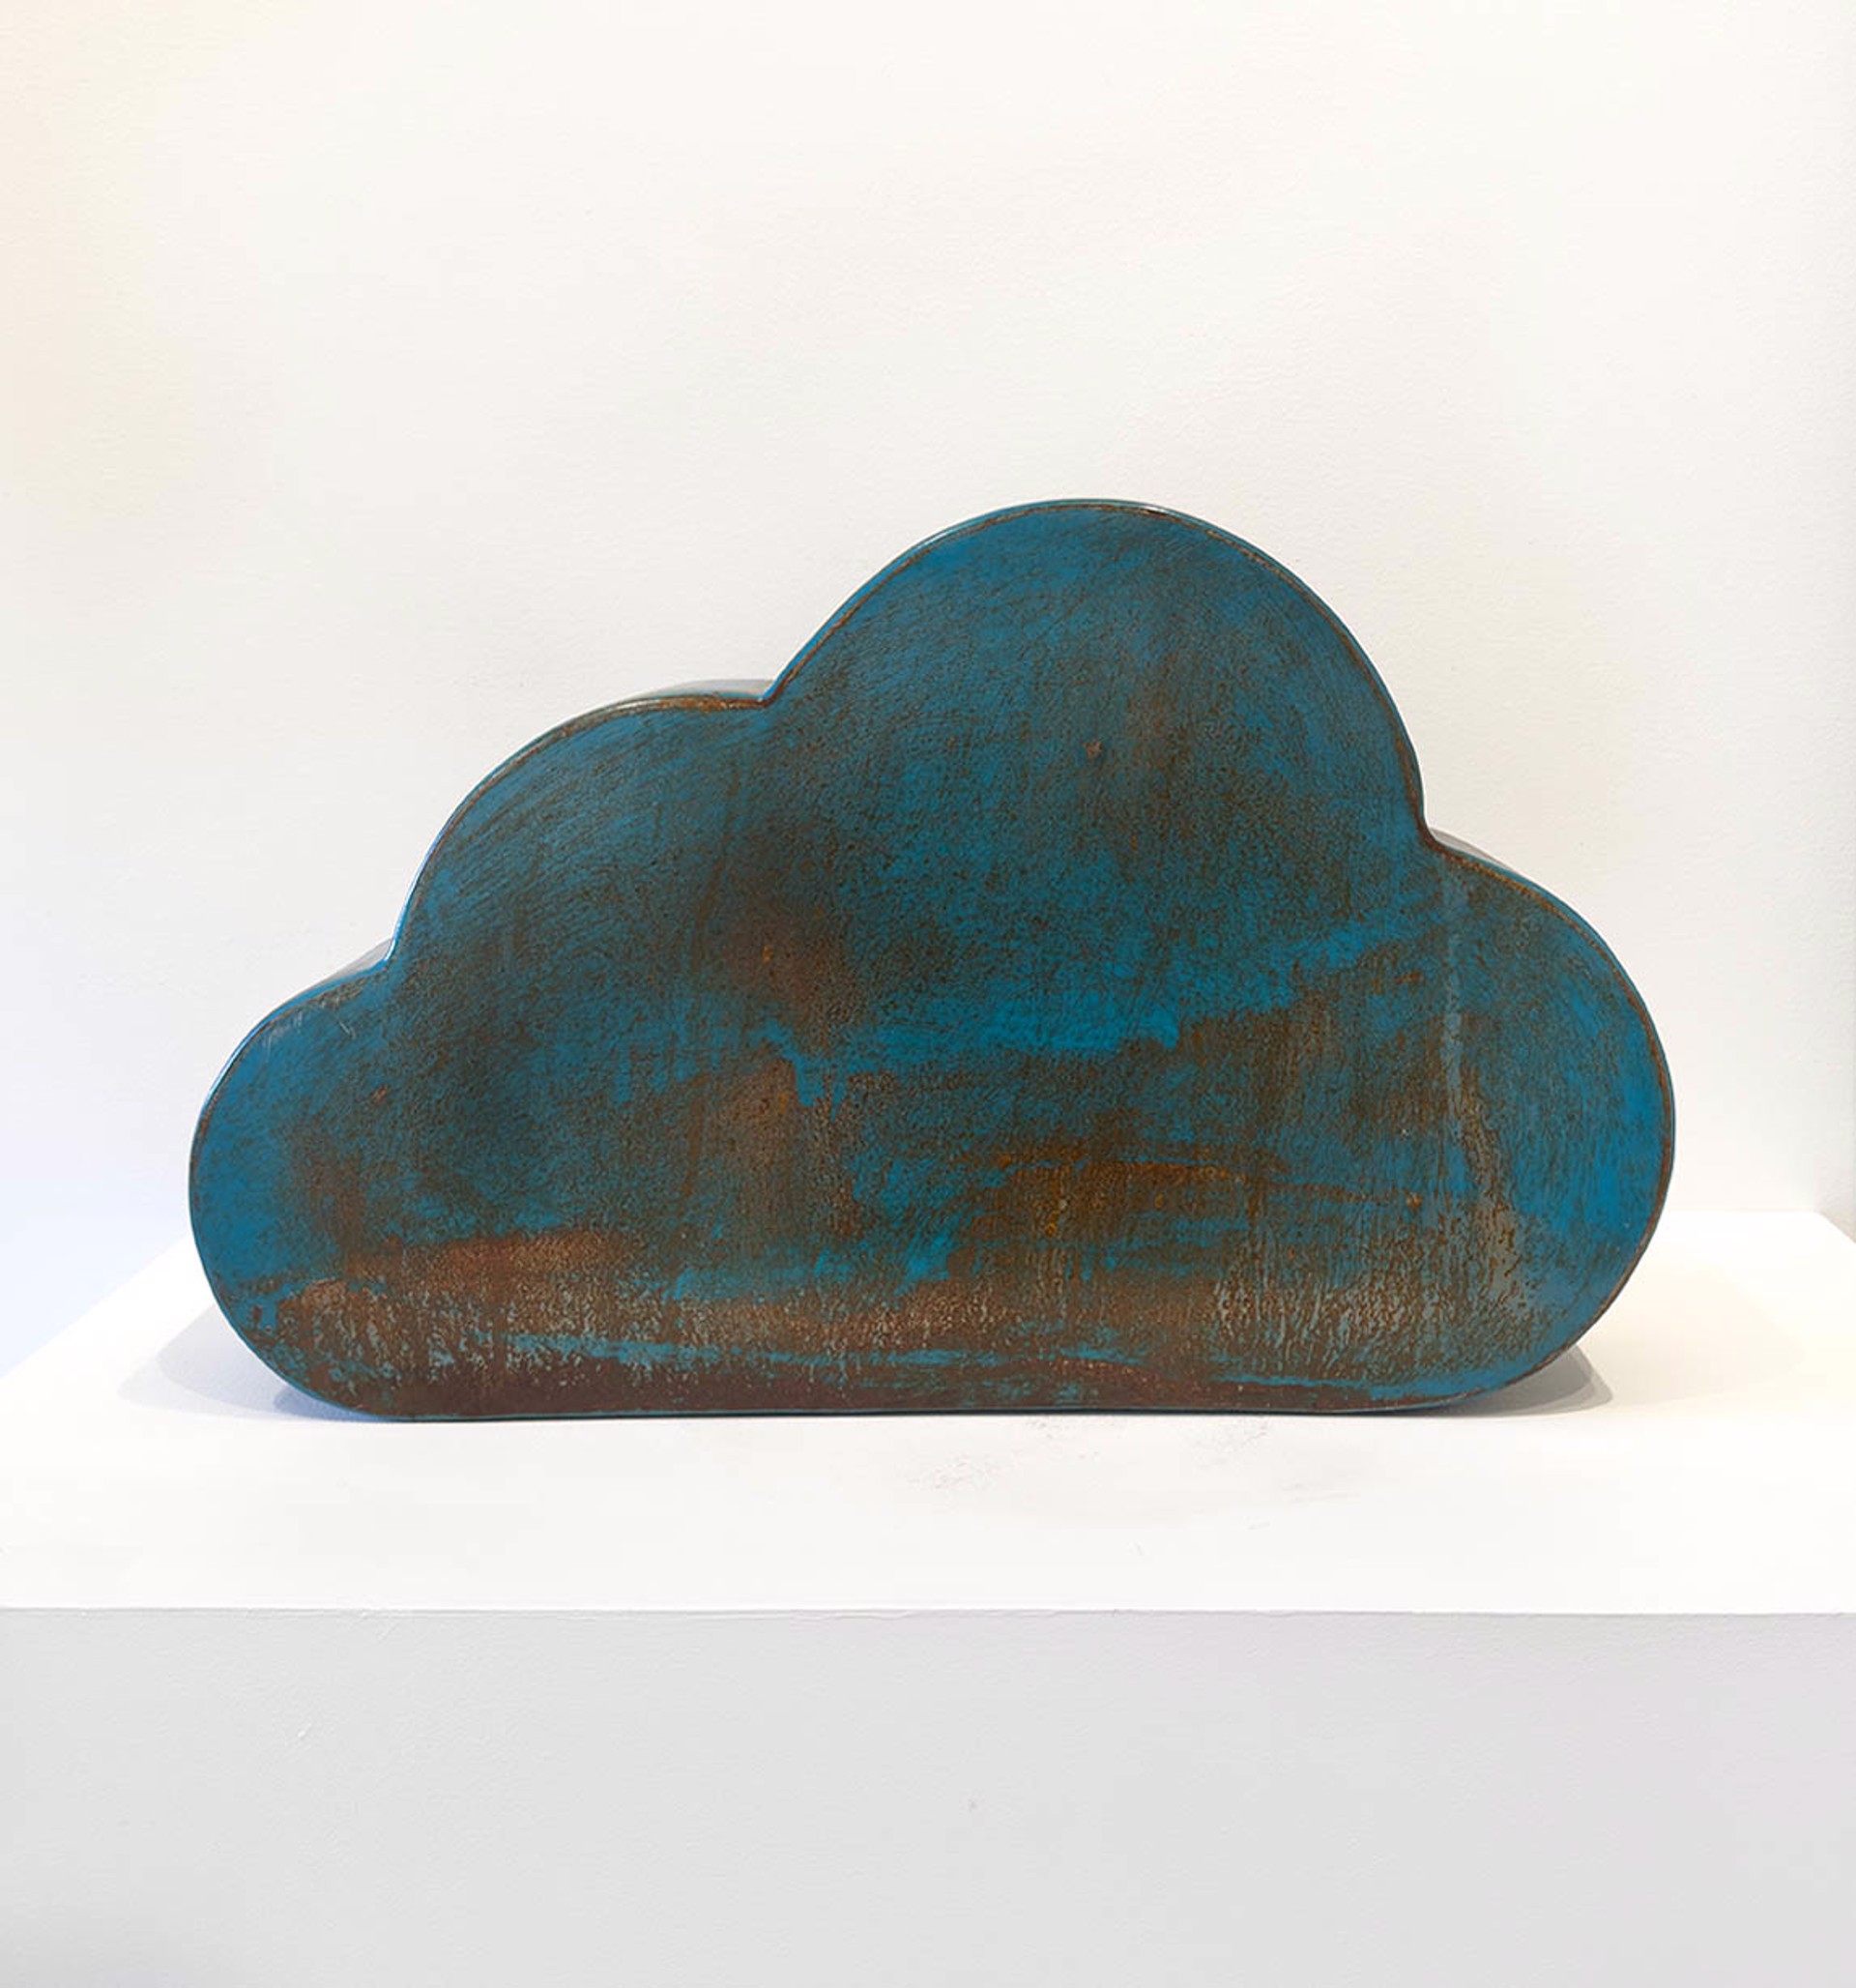 Original Steel Sculpture By Jeffie Brewer Featuring A Cartoon Cloud In Turquoise And Rusty Brown Finish